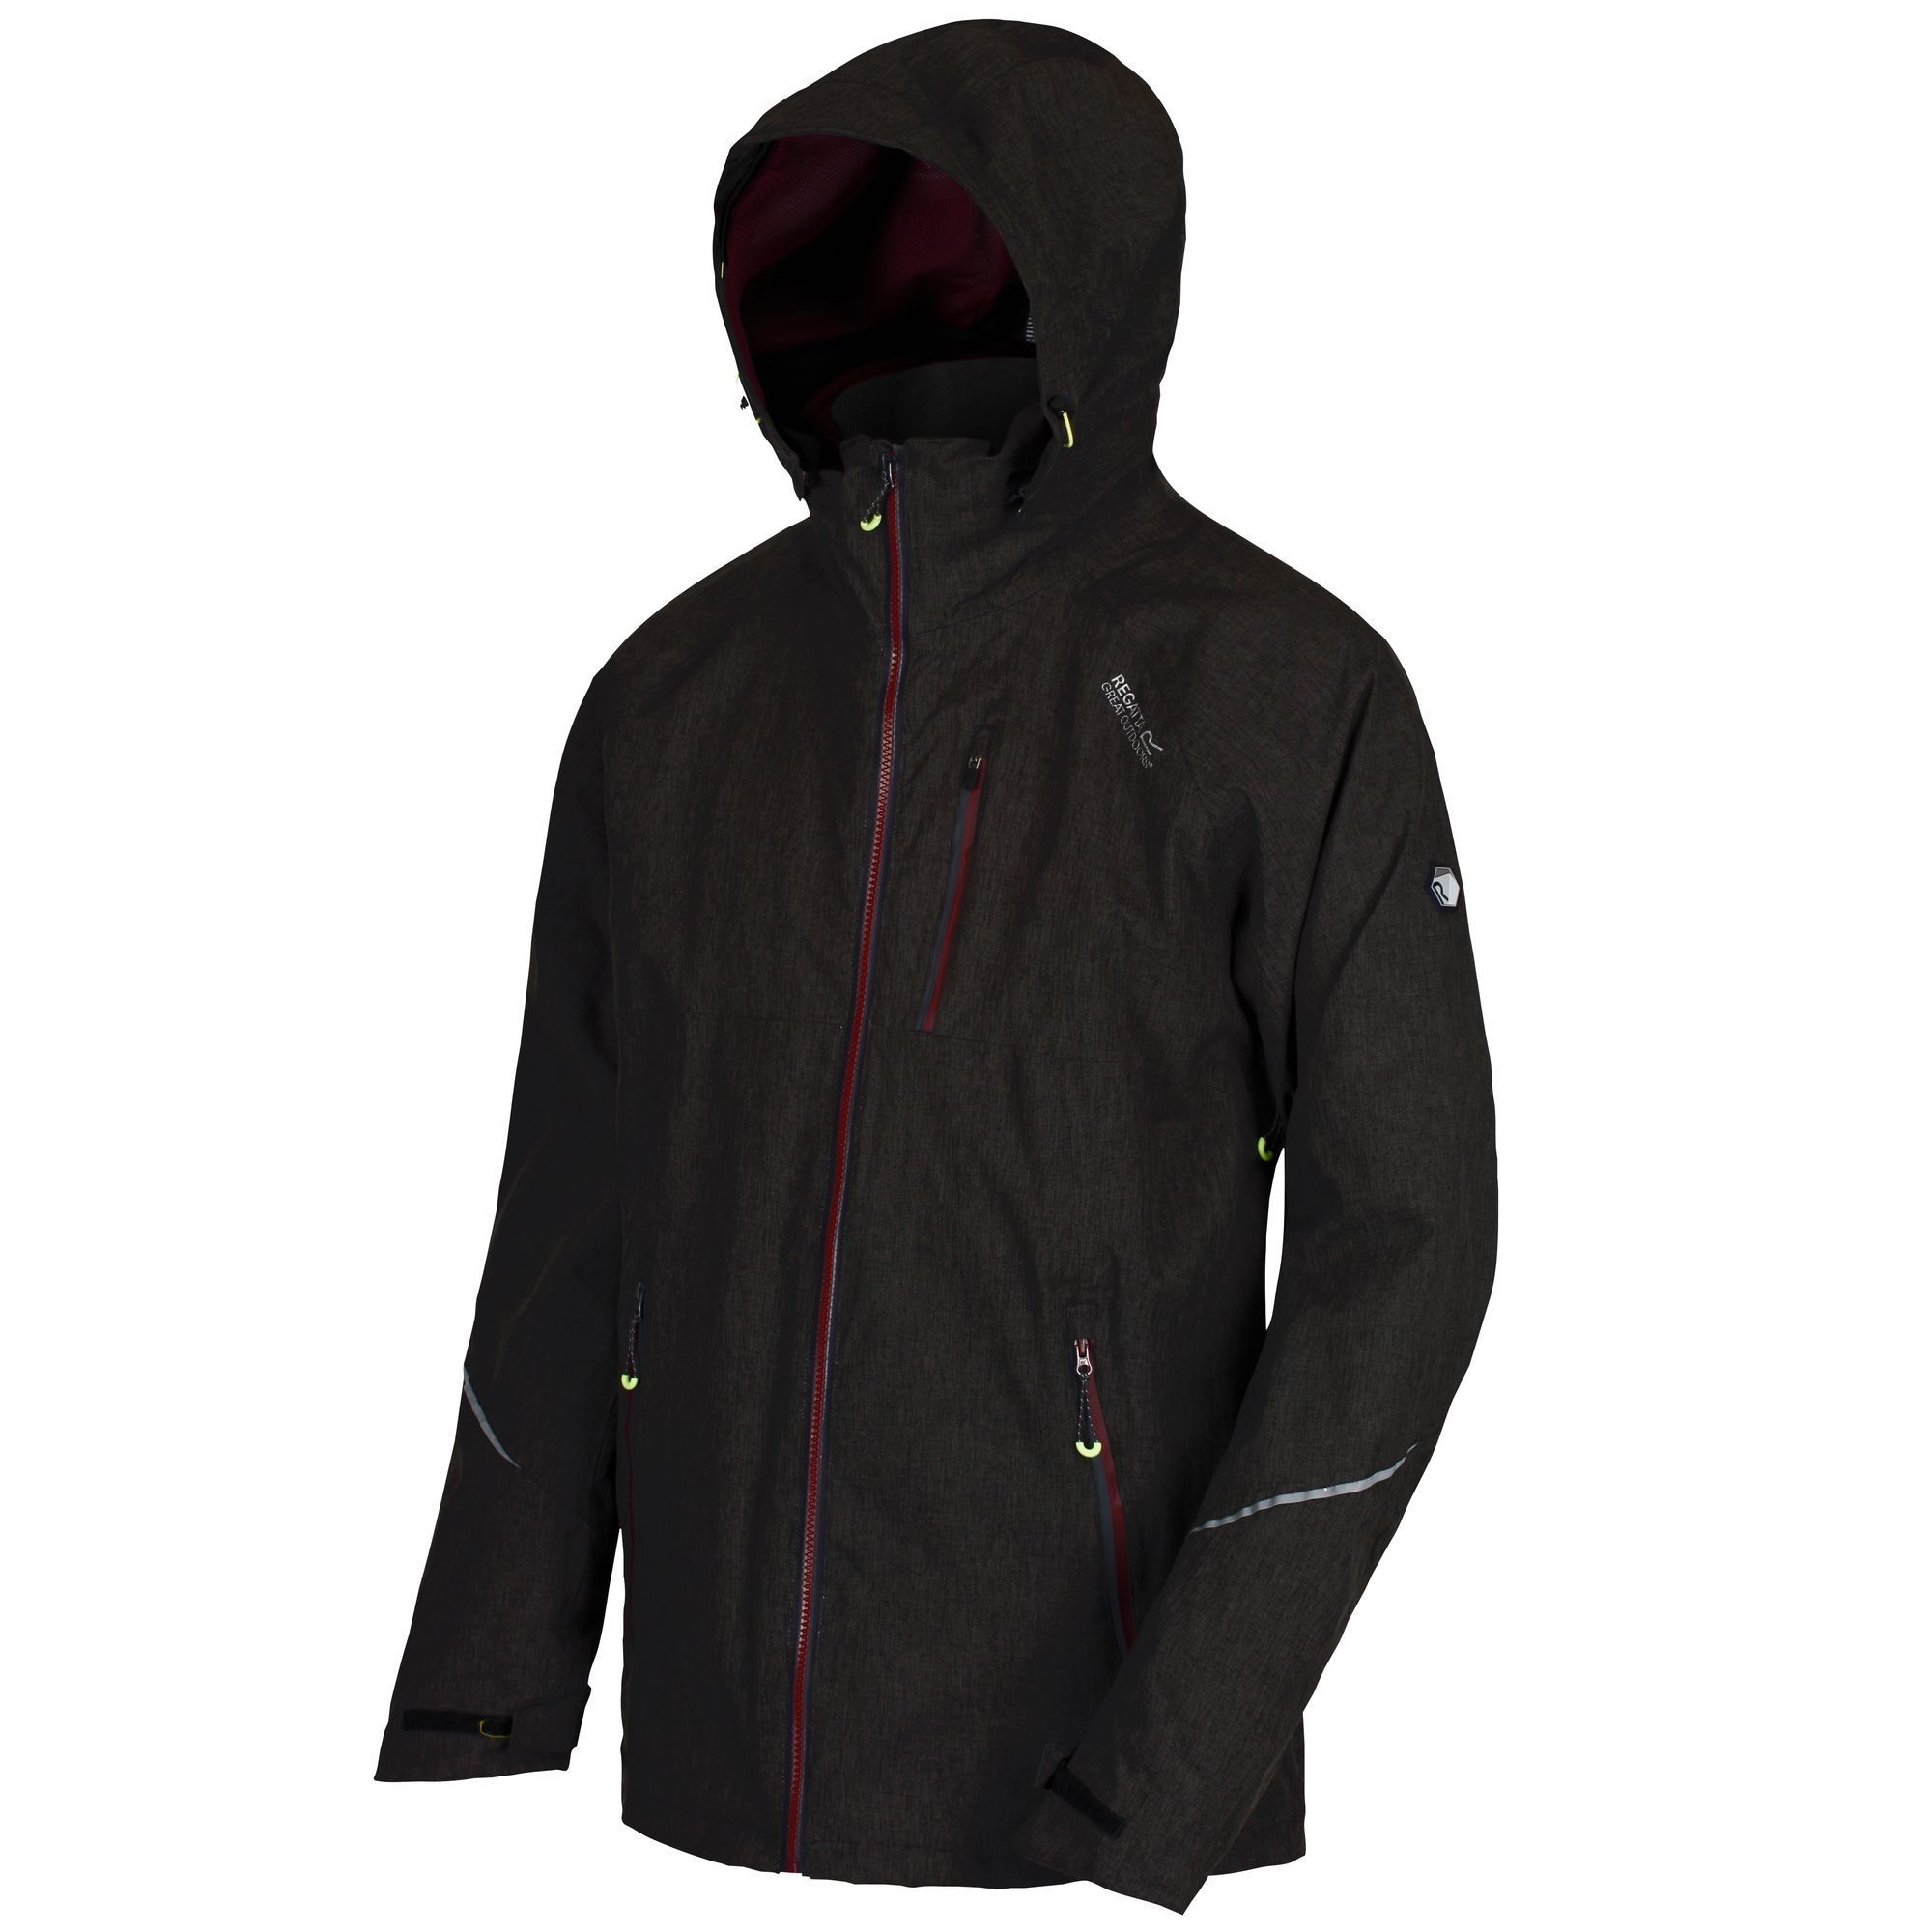 Made of highly waterproof, breathable ISOTEX 15,000 stretch fabric with a detachable Softshell inner. Features include two-way venting zips to the front and underarms, a fully adjustable mountain hood, articulated sleeve design for superb mobility. With the Regatta Outdoors print on the chest. 100% Polyester.